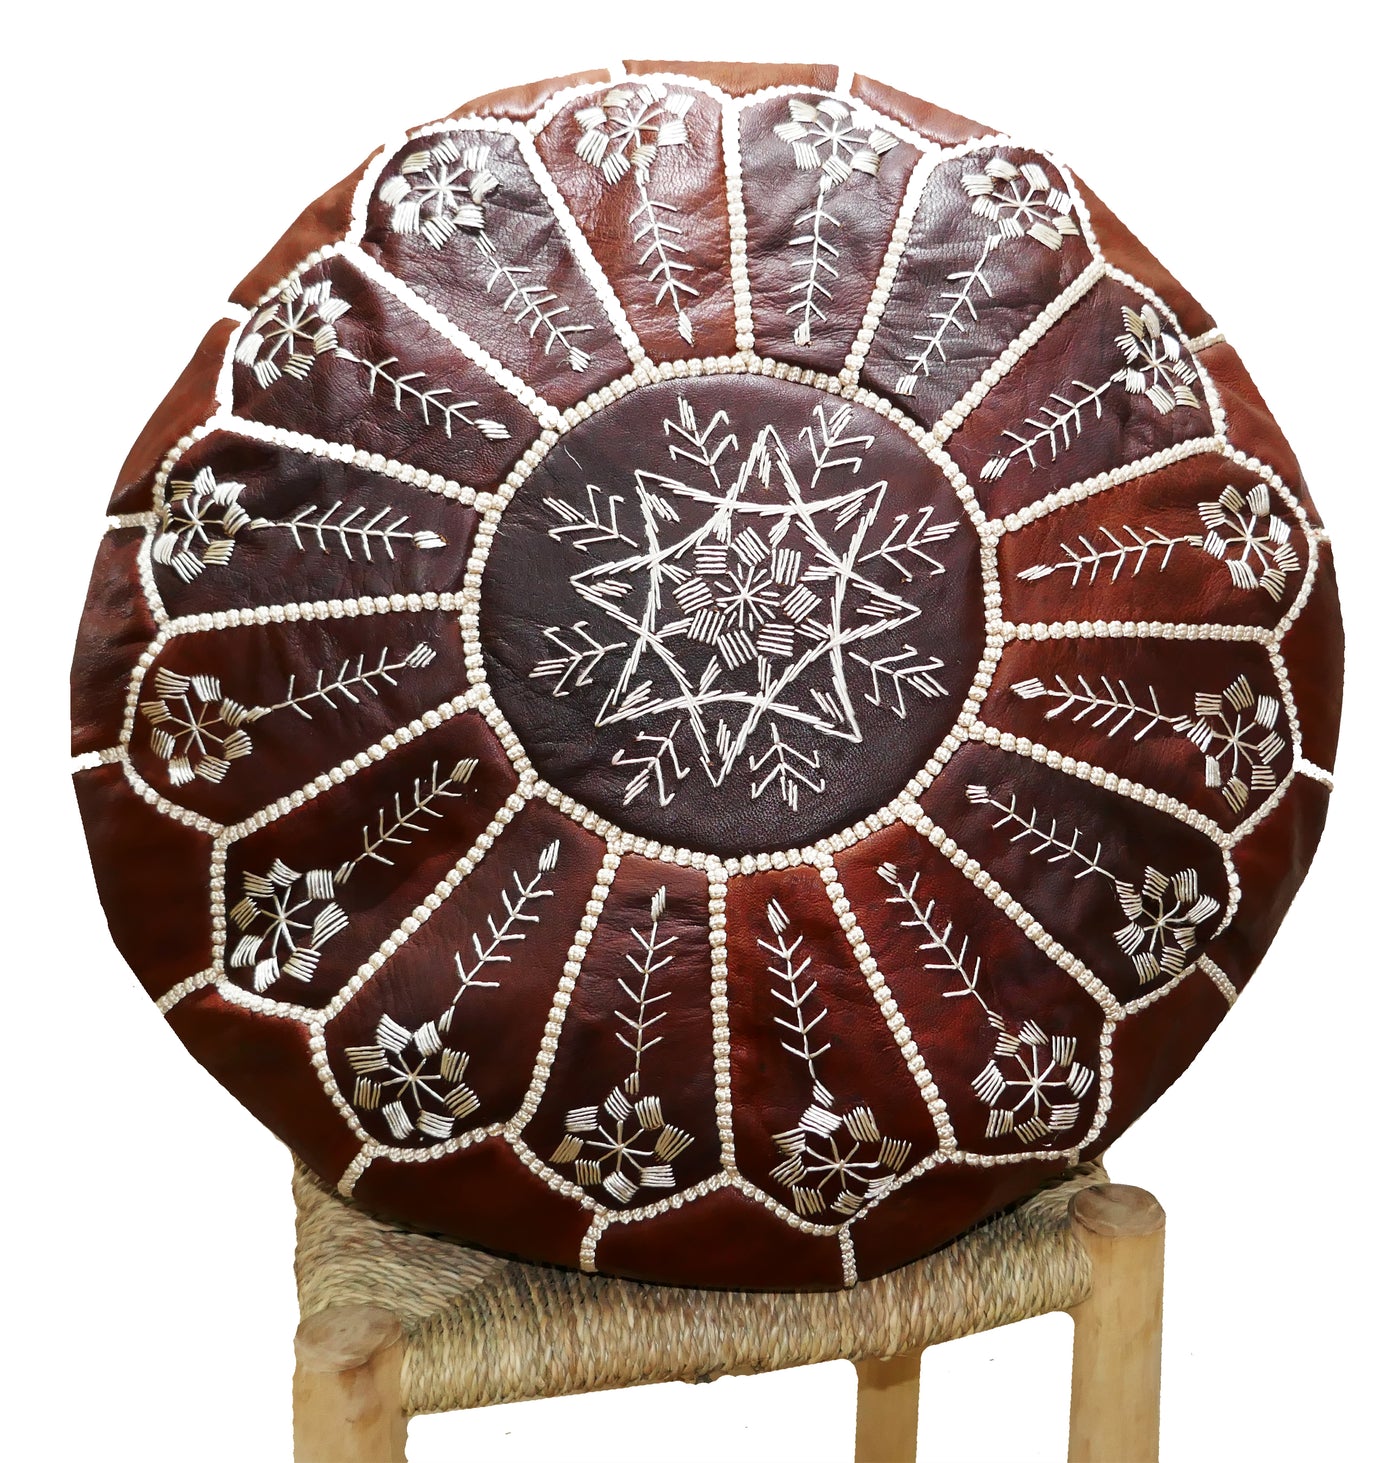 Moroccan Embroidered Leather Pouffe, Honey Brown